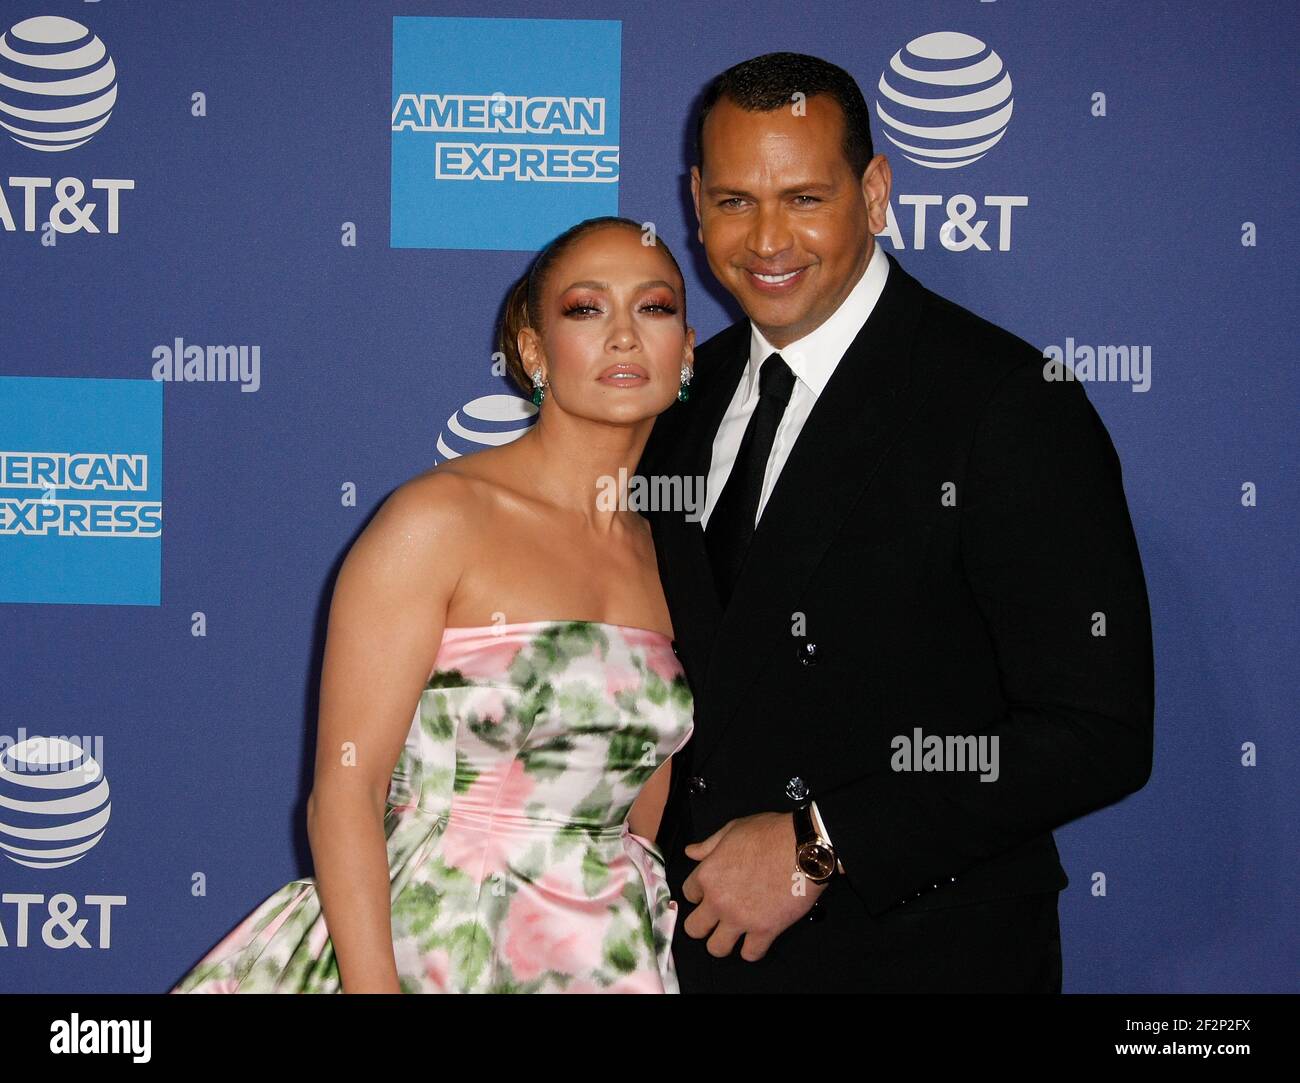 PALM SPRINGS, CALIFORNIA - JANUARY 02: Jennifer Lopez and Alex Rodriguez attend the 31st Annual Palm Springs International Film Festival Film Awards Gala at Palm Springs Convention Center on January 02, 2020 in Palm Springs, California. Photo: CraSH/imageSPACE/MediaPunch Stock Photo